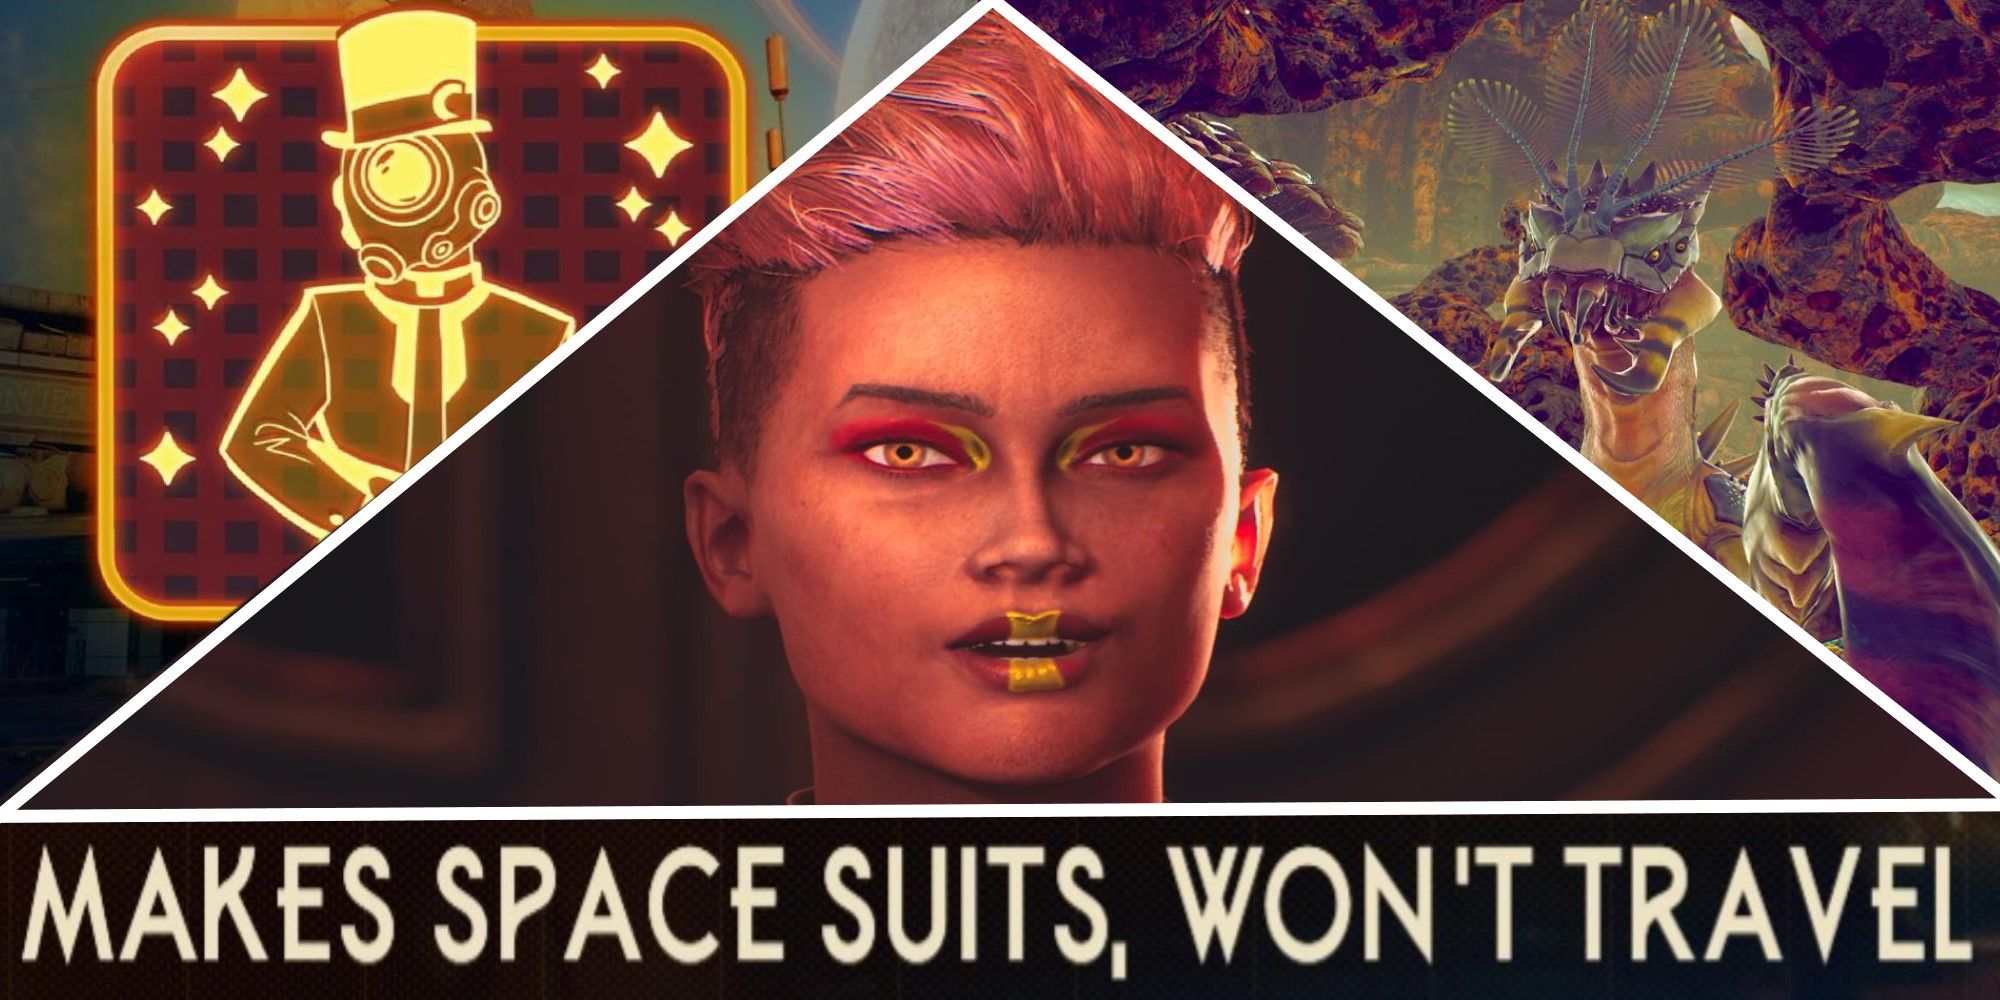 The Outer Worlds Split Image with Celeste Joliceour the Well Dressed Achievement a Mantiqueen and a guest title for Makes Space Suits, Won't Travel